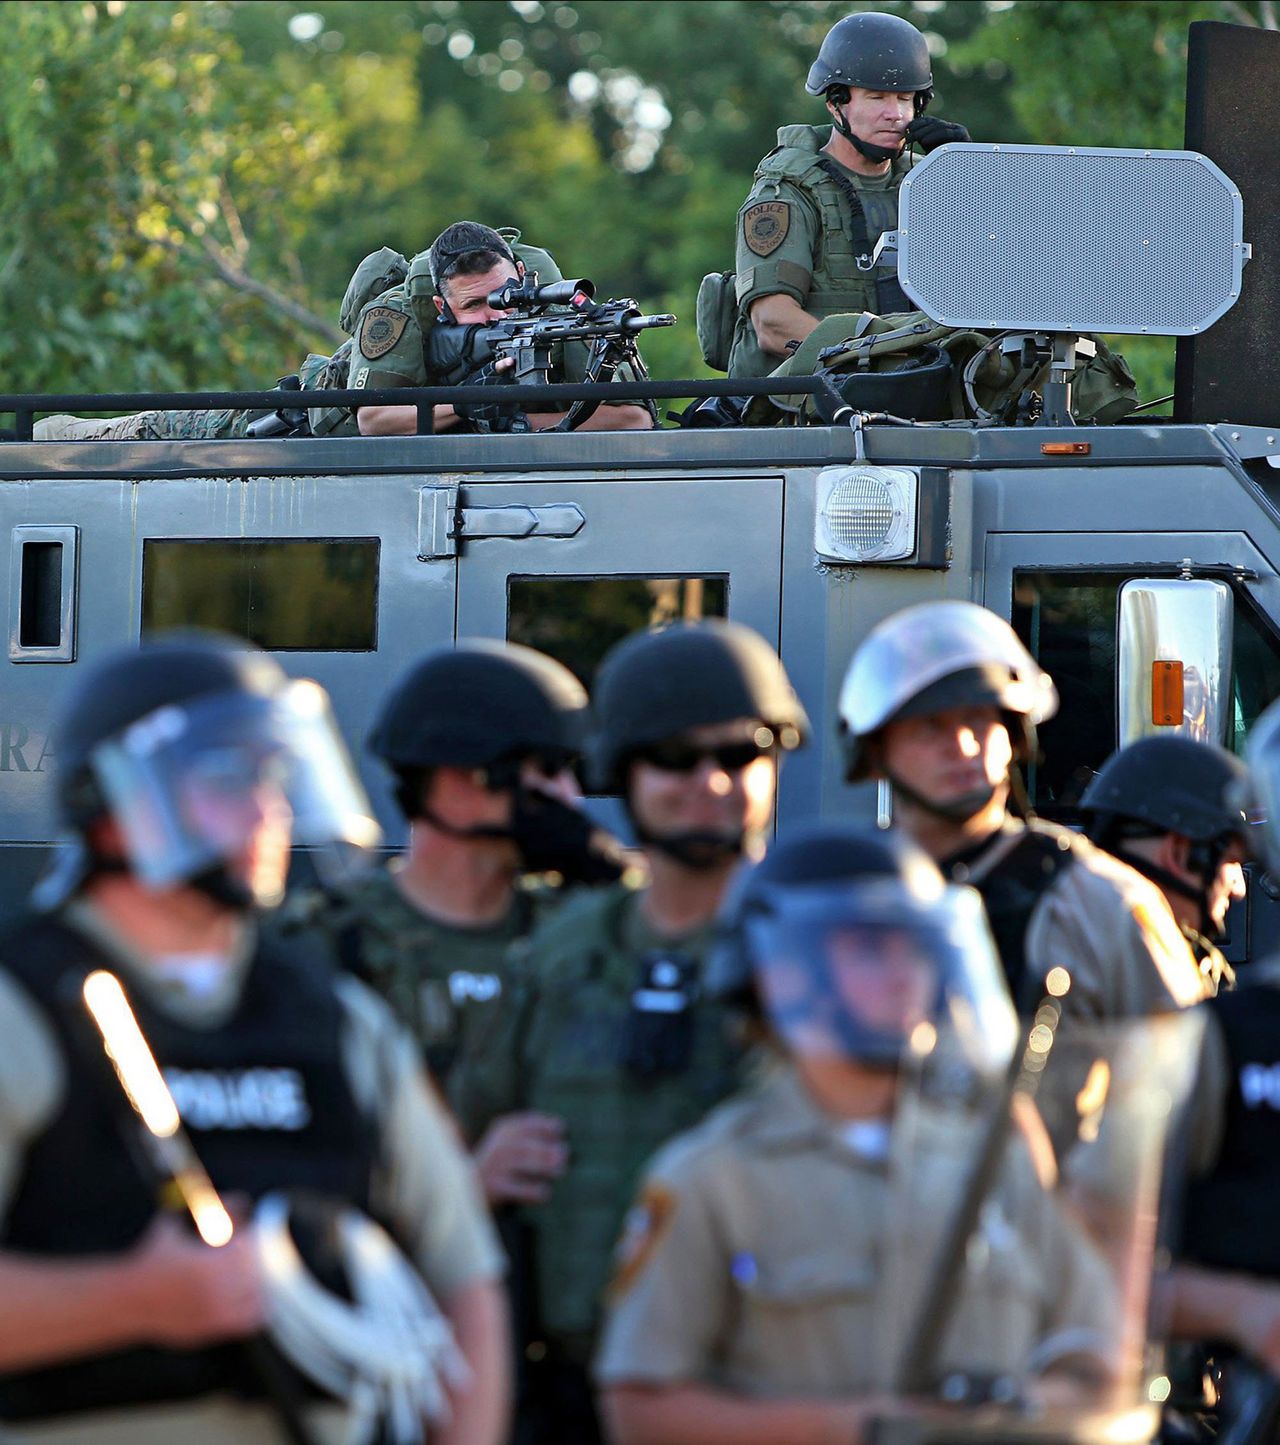 Police officers use military equipment on the streets of Ferguson, Missouri, days after the fatal shooting of Michael Brown.